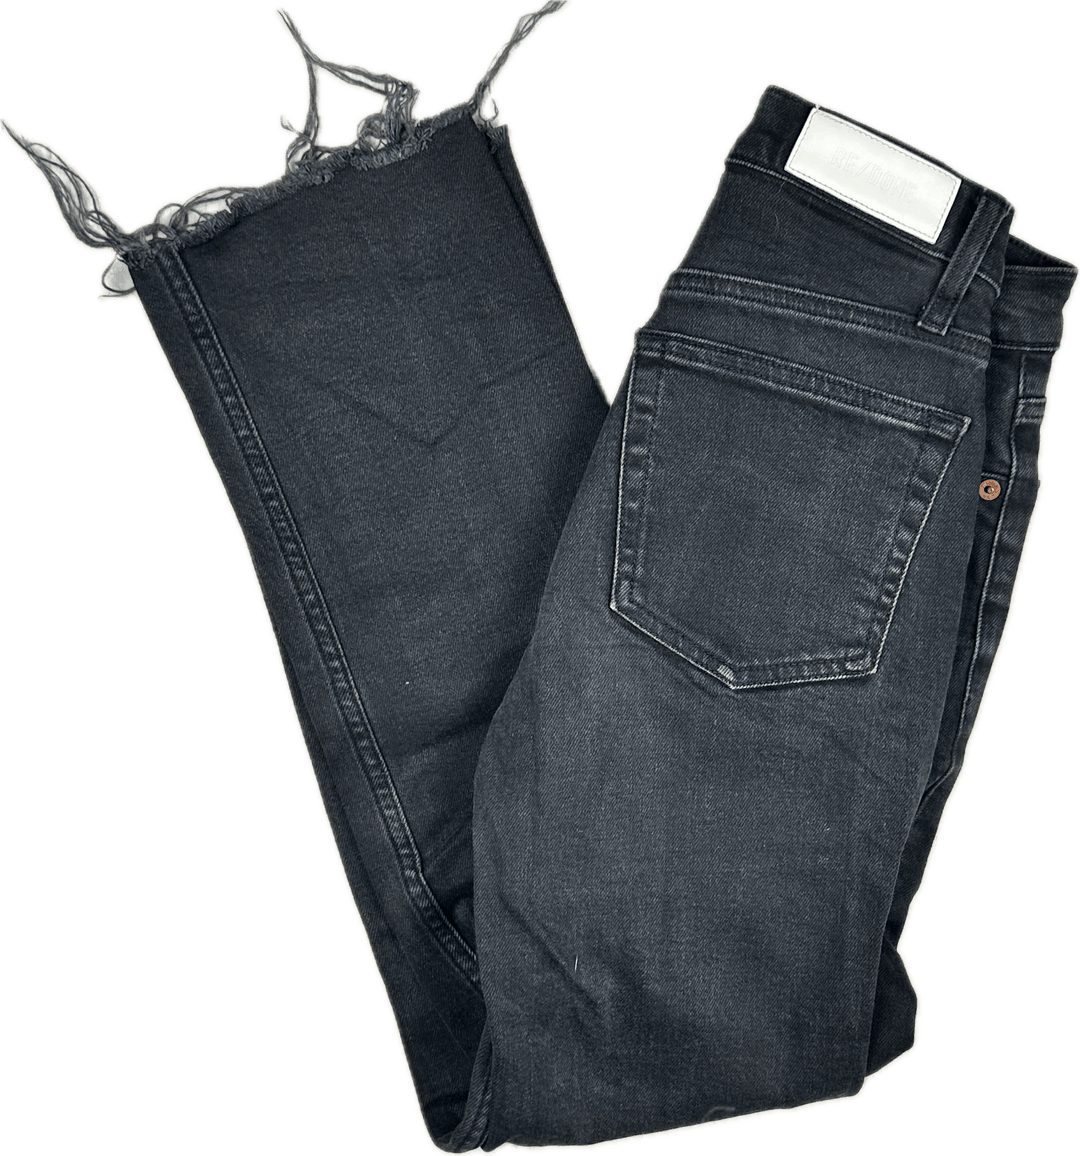 RE/DONE 70s Stovepipe Black Jeans -Size 25 - Jean Pool